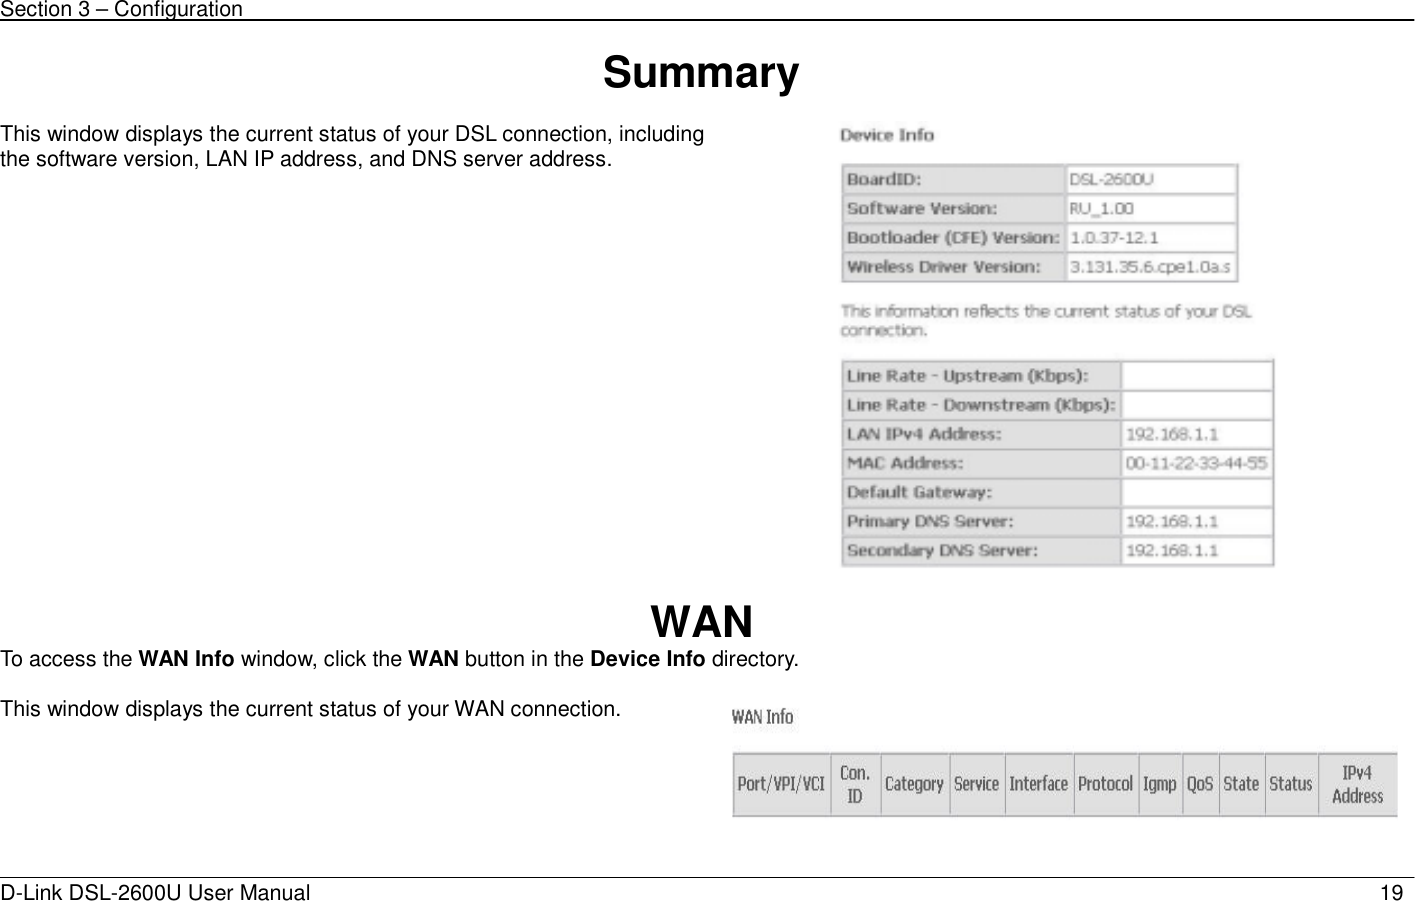 Section 3 – Configuration   D-Link DSL-2600U User Manual                            19Summary  This window displays the current status of your DSL connection, including the software version, LAN IP address, and DNS server address.   WAN To access the WAN Info window, click the WAN button in the Device Info directory.  This window displays the current status of your WAN connection. 